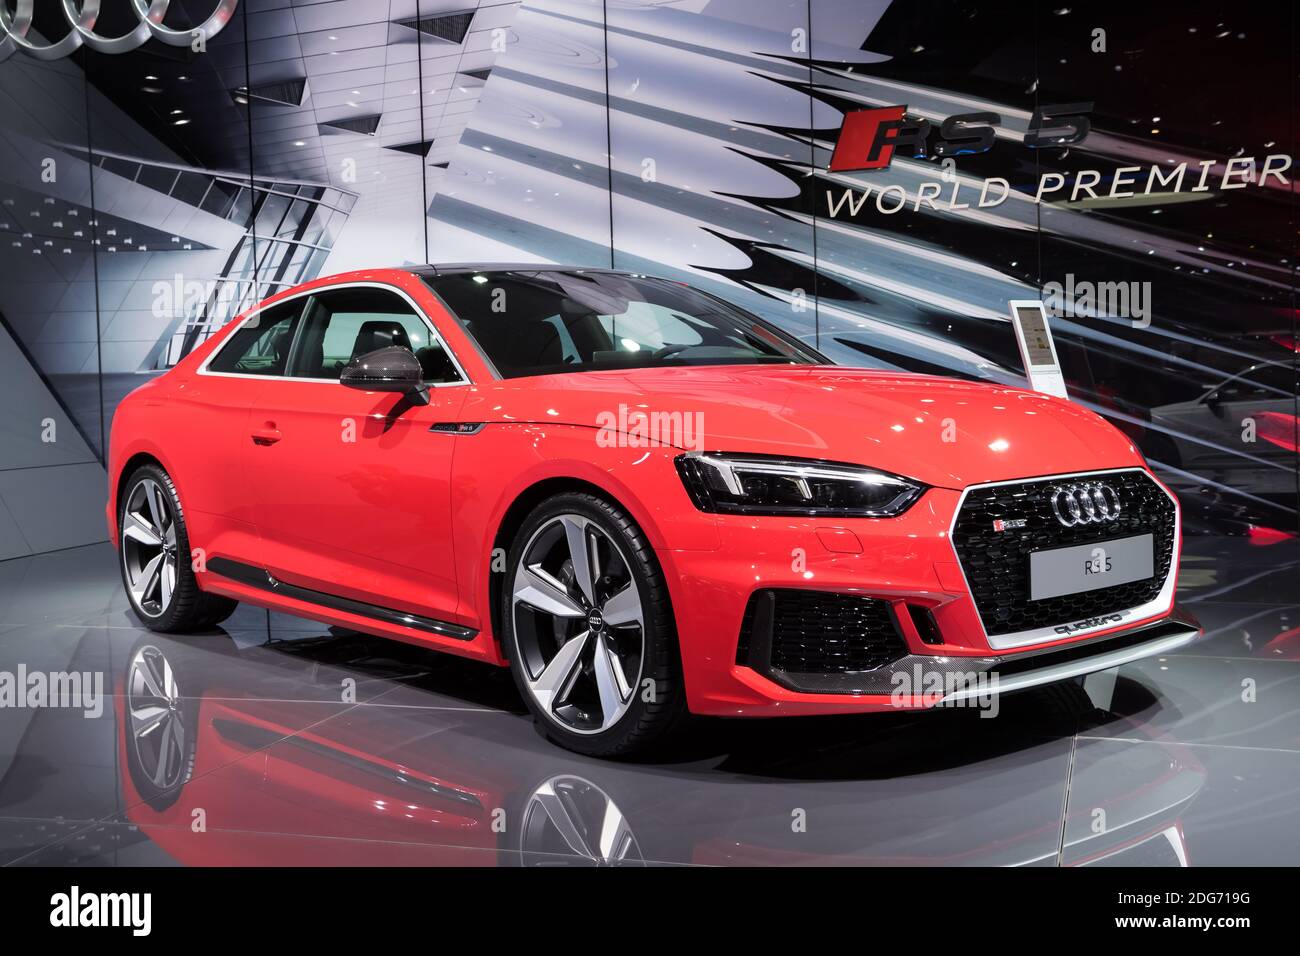 Audi RS5 is on display during the 87th Geneva International Motor Show at Palexpo Exhibition Centre in Geneva, Switzerland on March 08, 2017. The show opens to the public on March 9 to 19. Photo by Loona/ABACAPRESS.COM Stock Photo